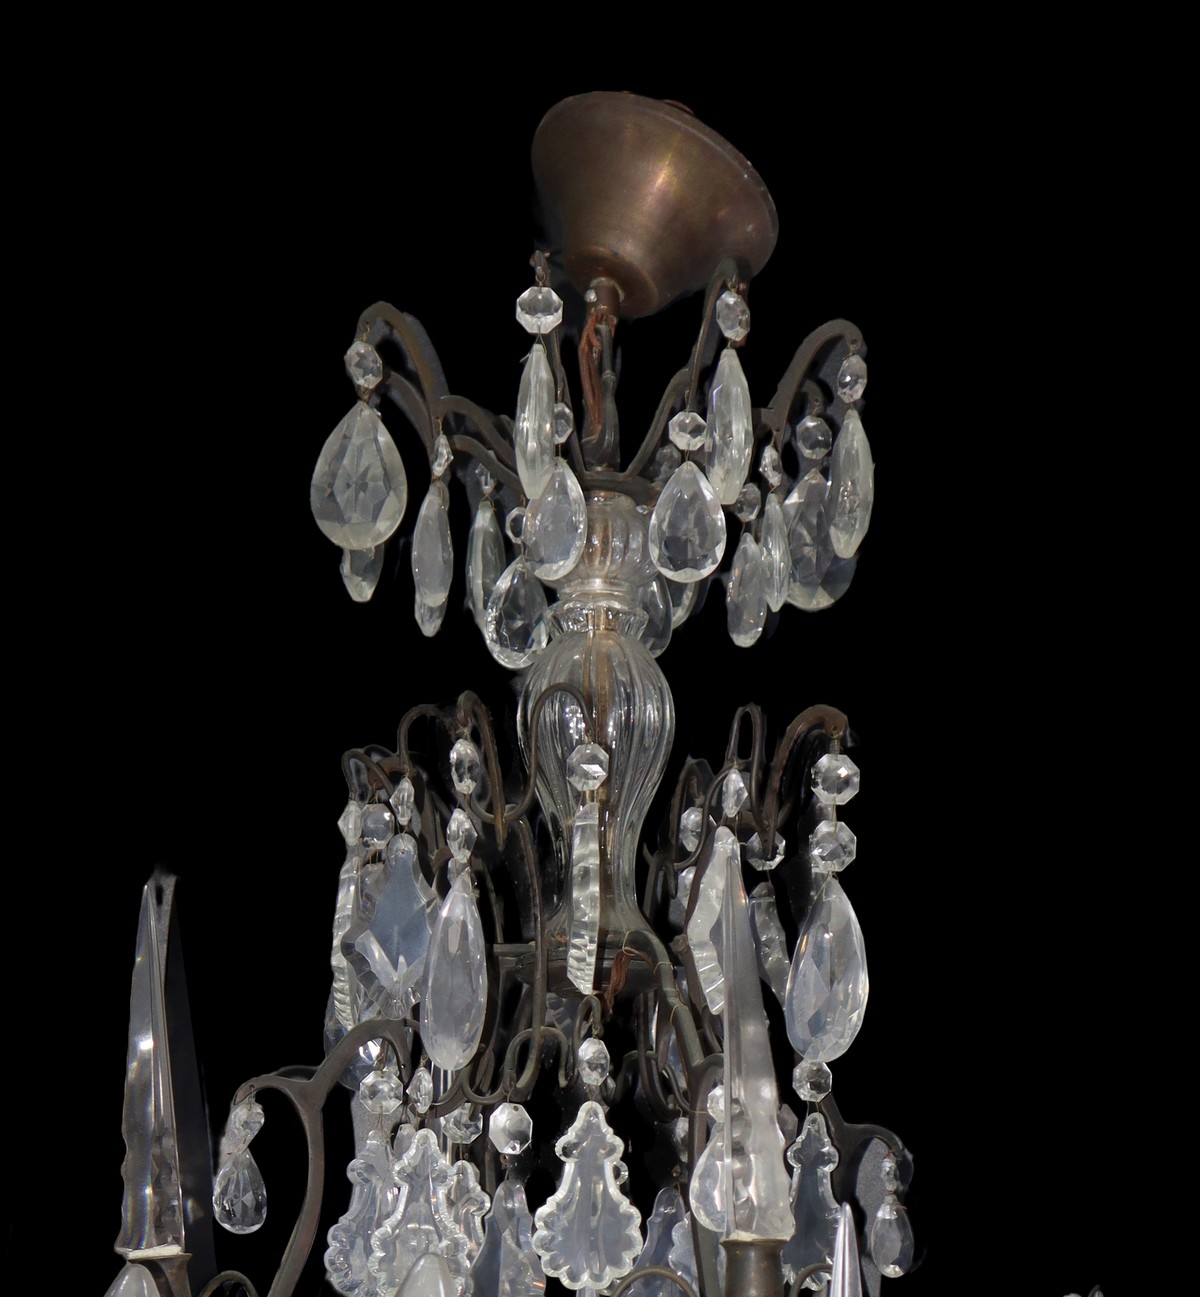 Chandelier with metal structure, hand-cut glass toasts, 8 lights, Early 20th century - Image 3 of 3